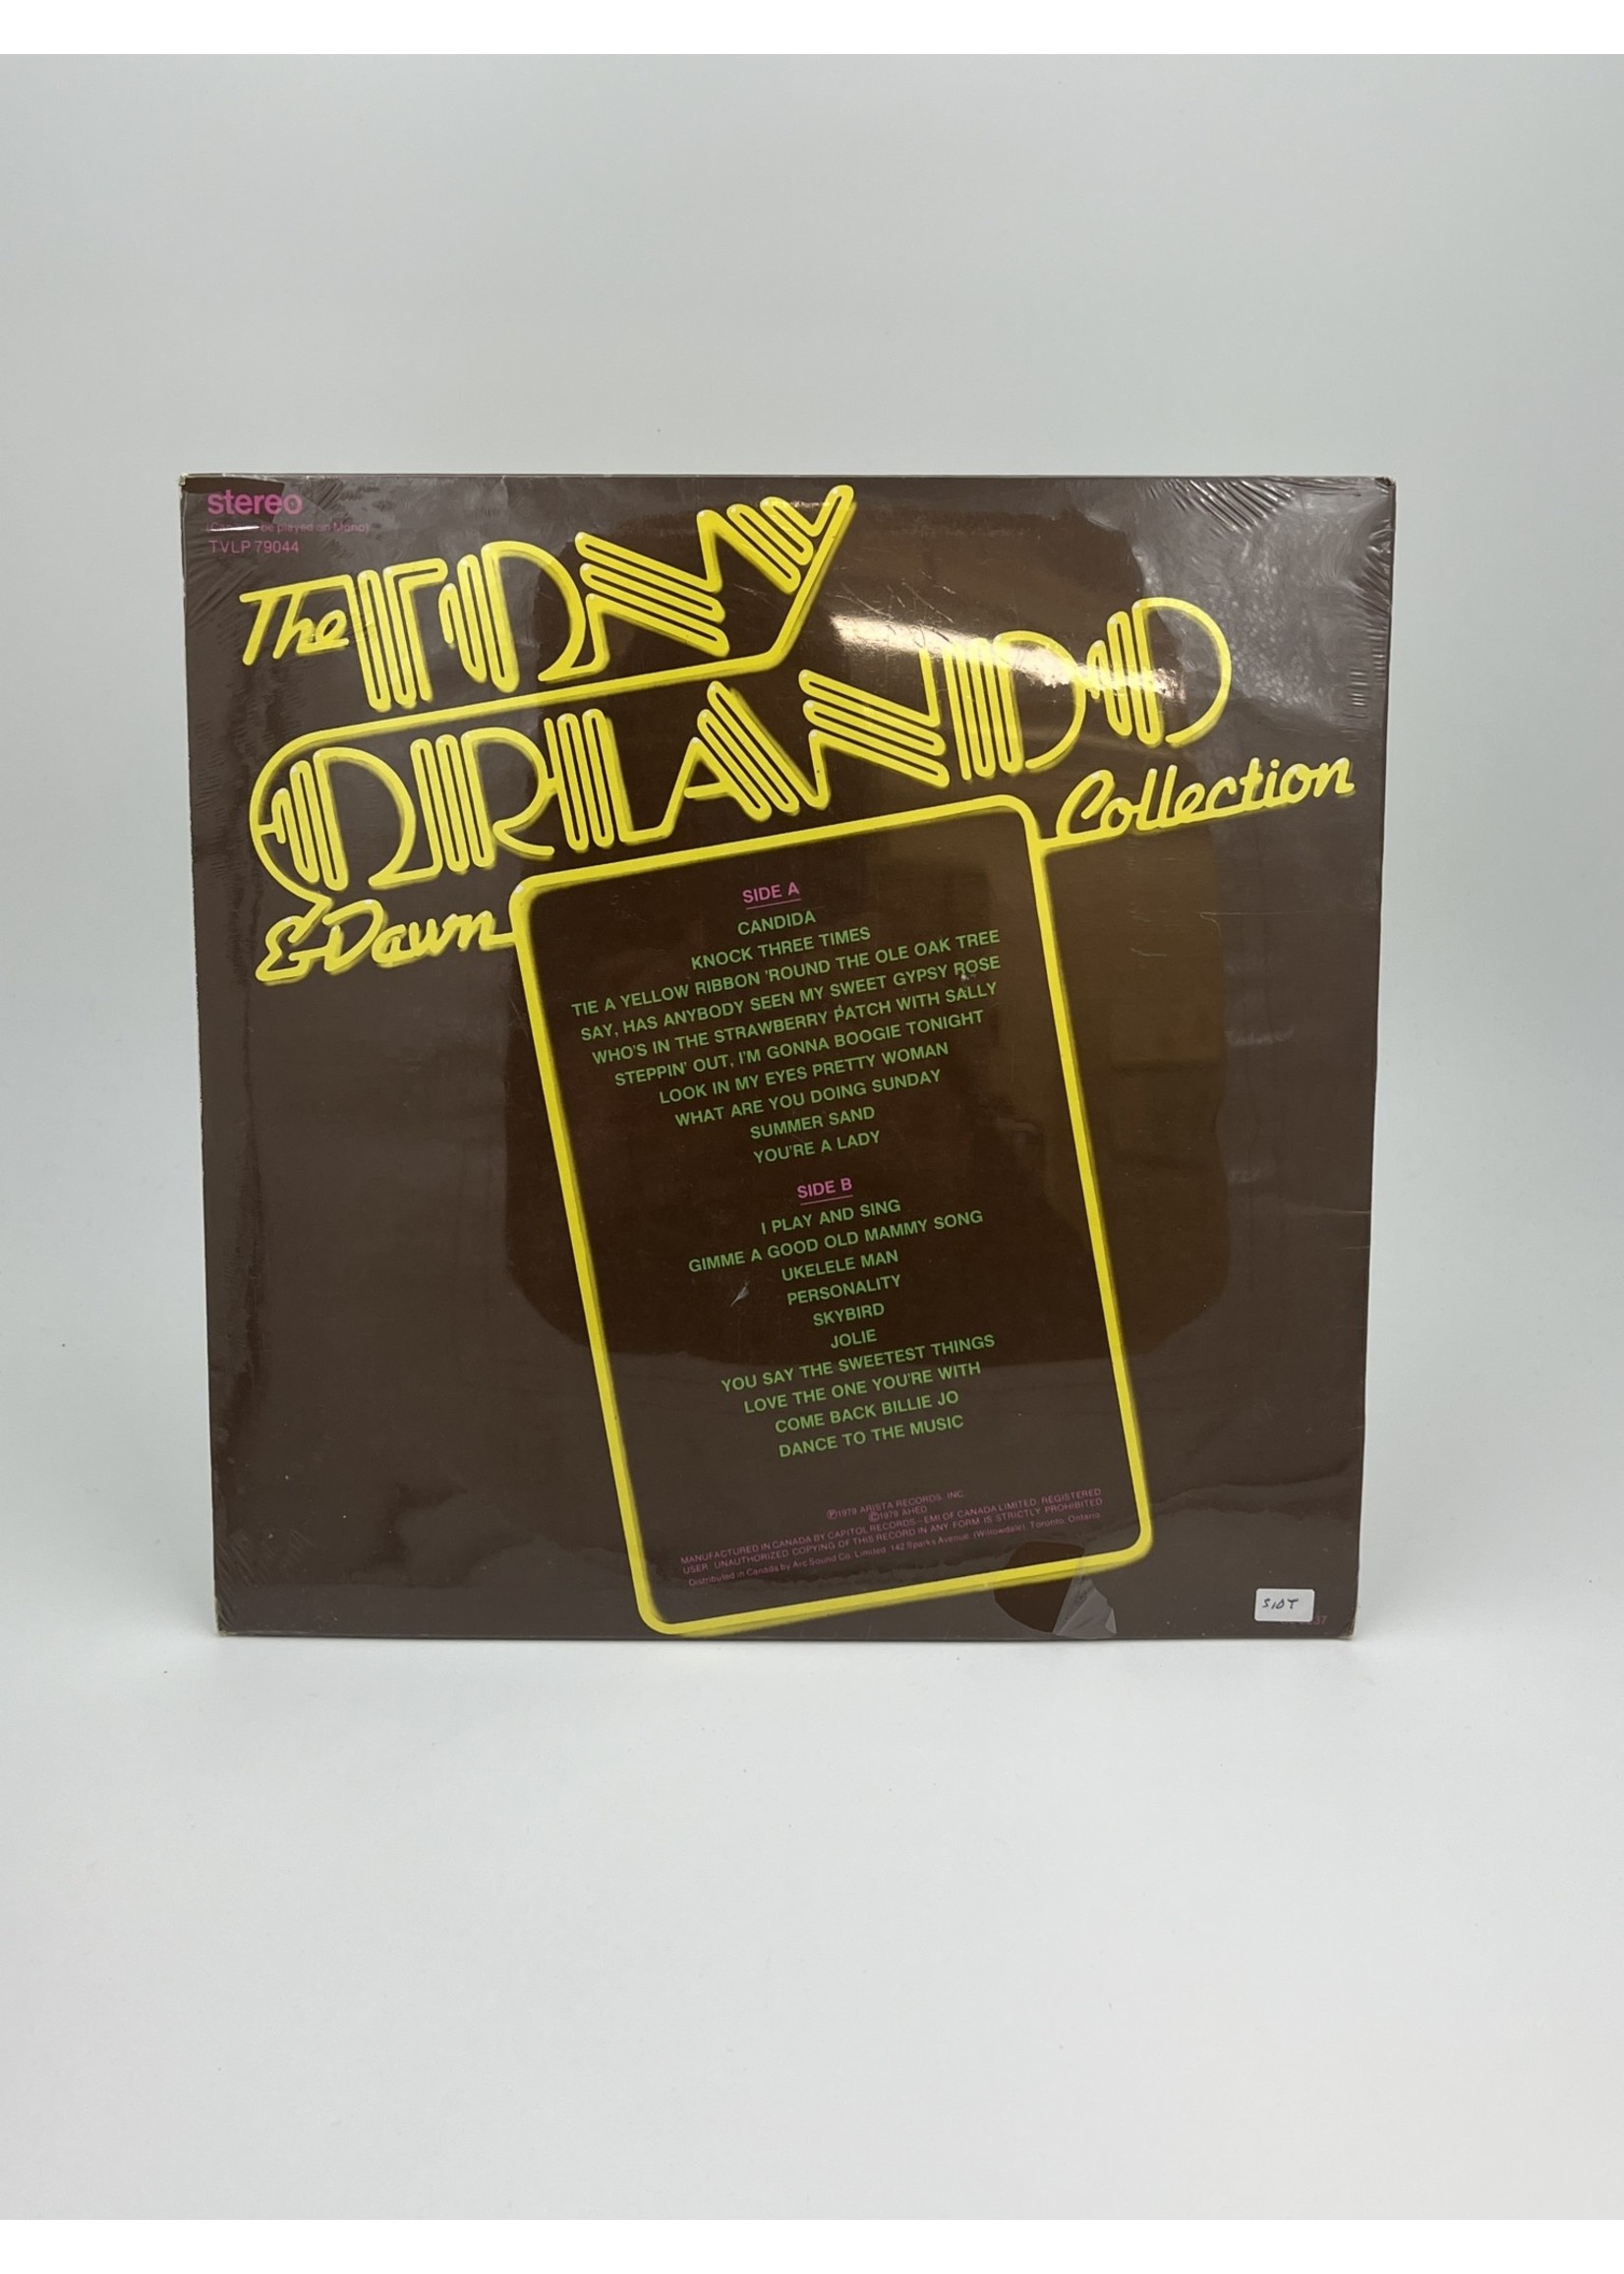 LP Tony Orlando and Dawn Collection 20 Greatest Hits Sealed LP Record